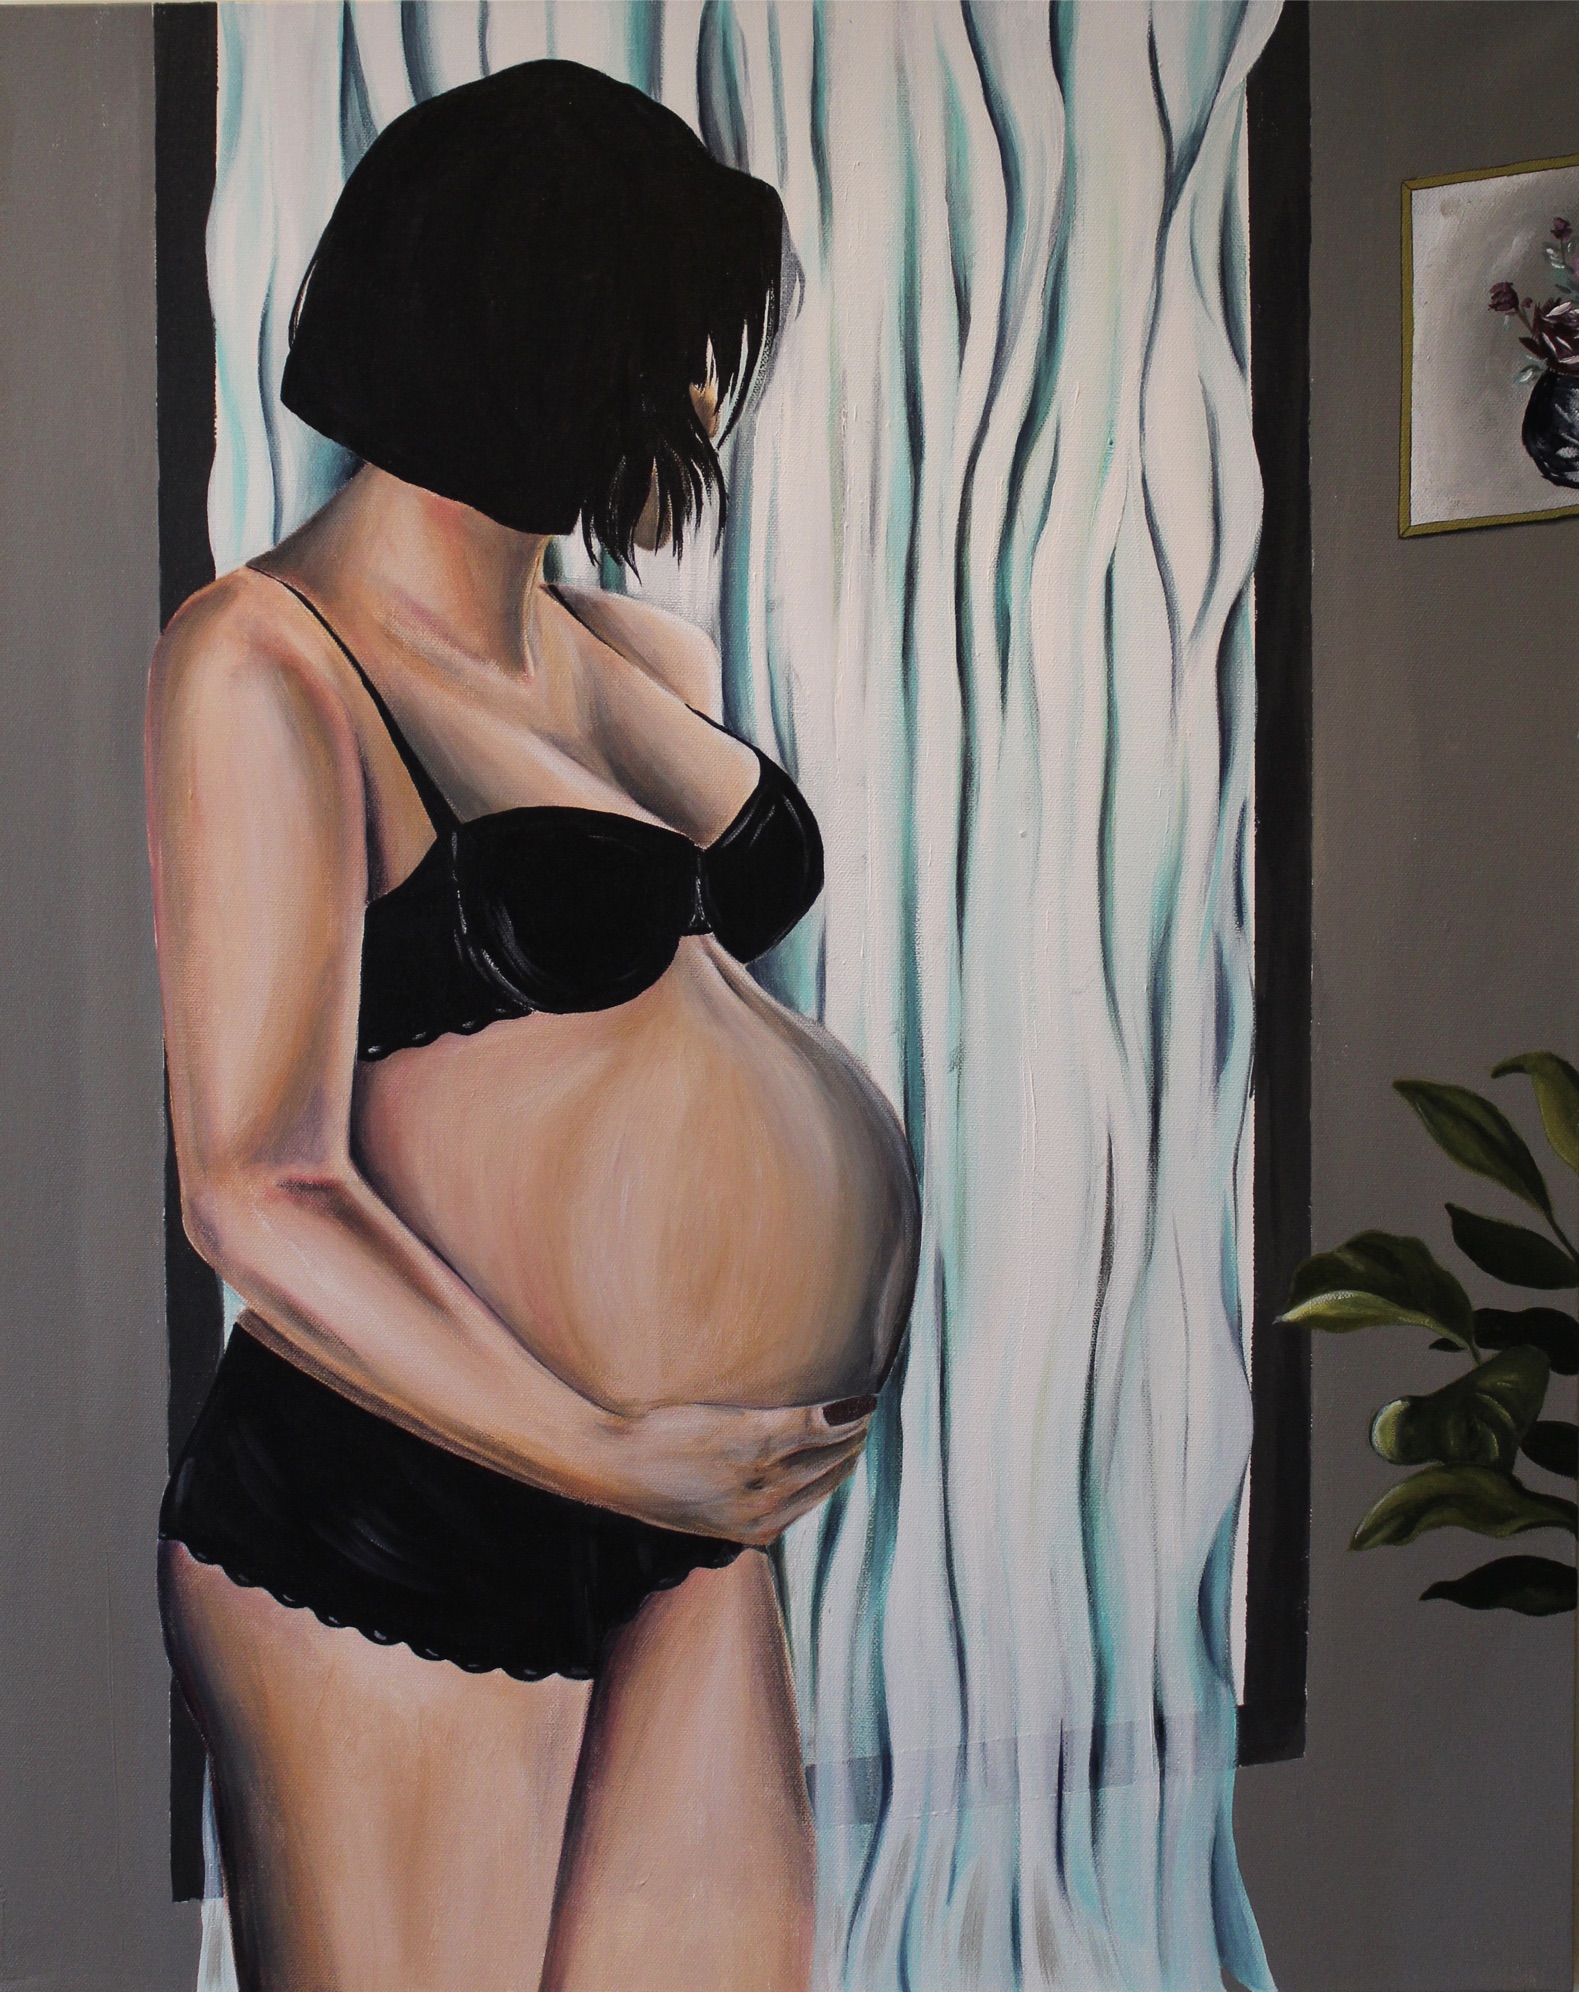 Painting of a pregnant woman